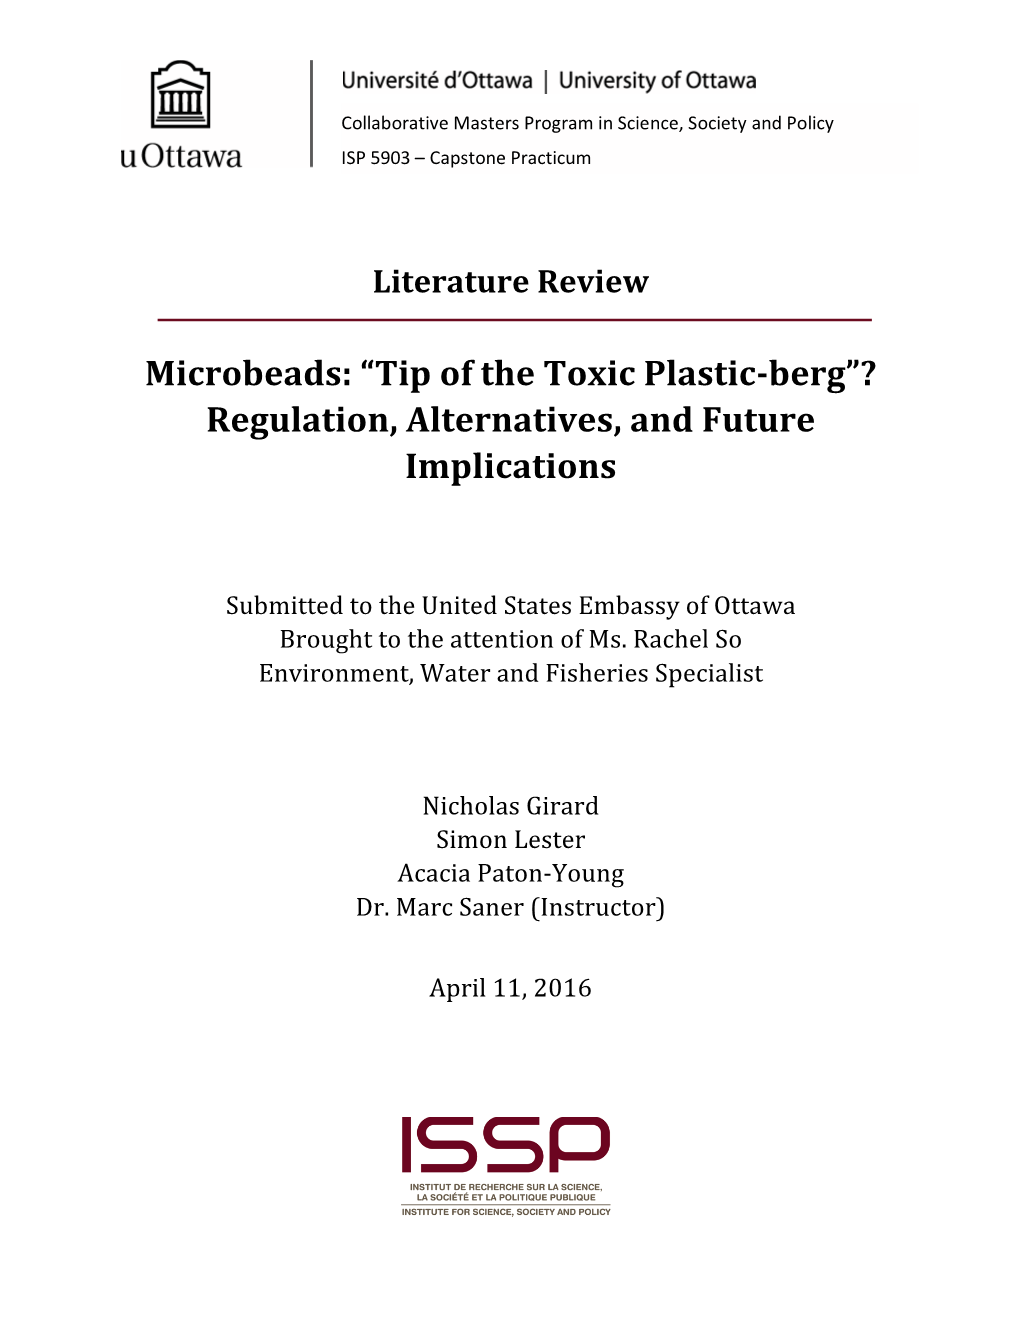 Microbeads: “Tip of the Toxic Plastic-Berg”? Regulation, Alternatives, and Future Implications